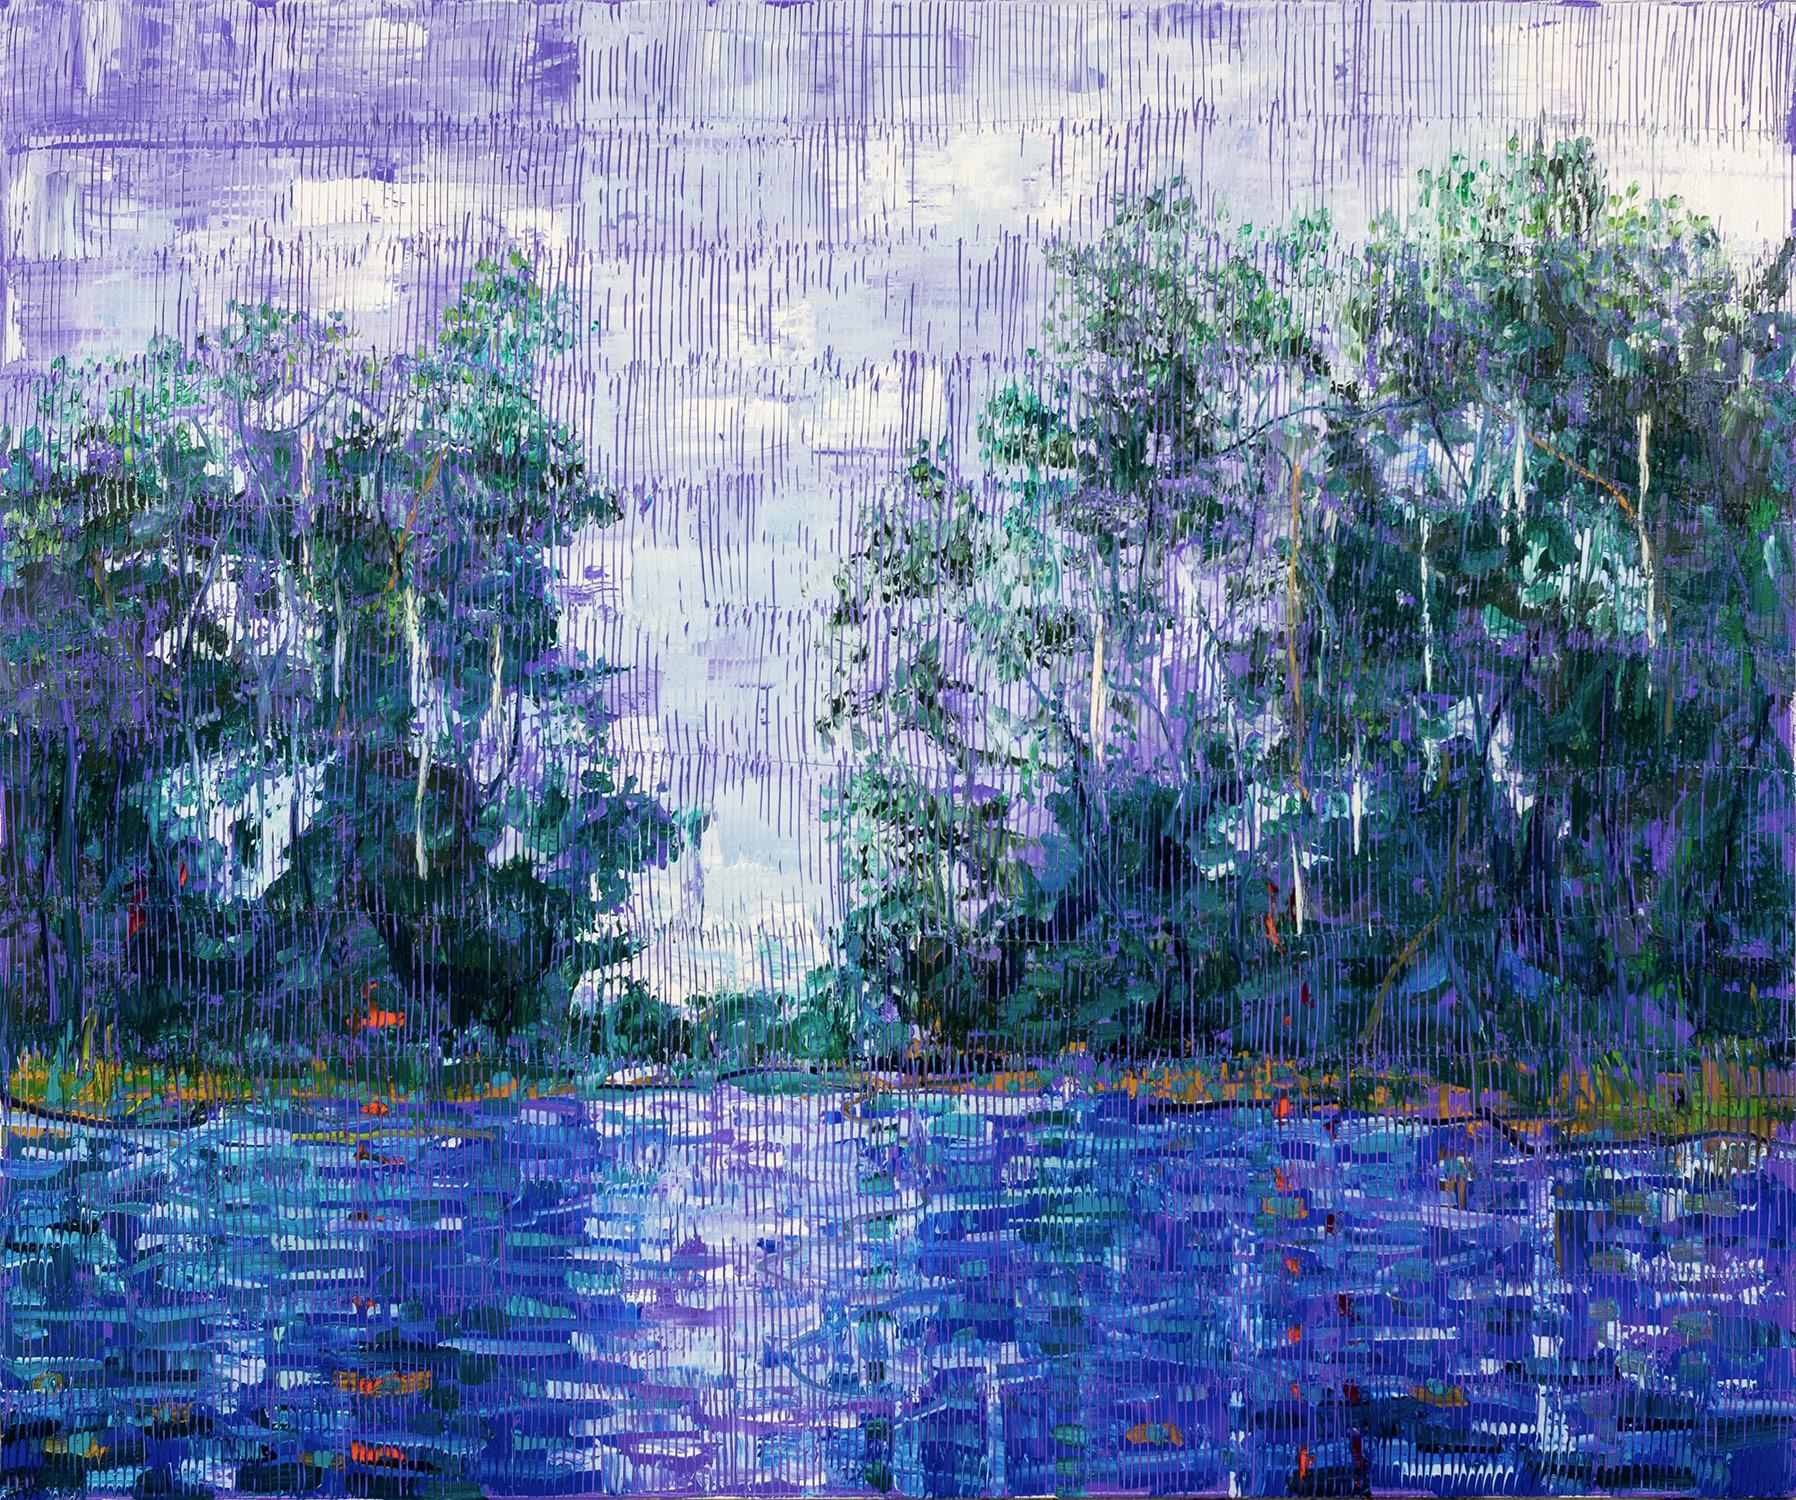 Hunt Slonem Abstract Painting - "Bayou La Fouche" Blue, Purple & Green toned Landscape Contemporary Oil Painting